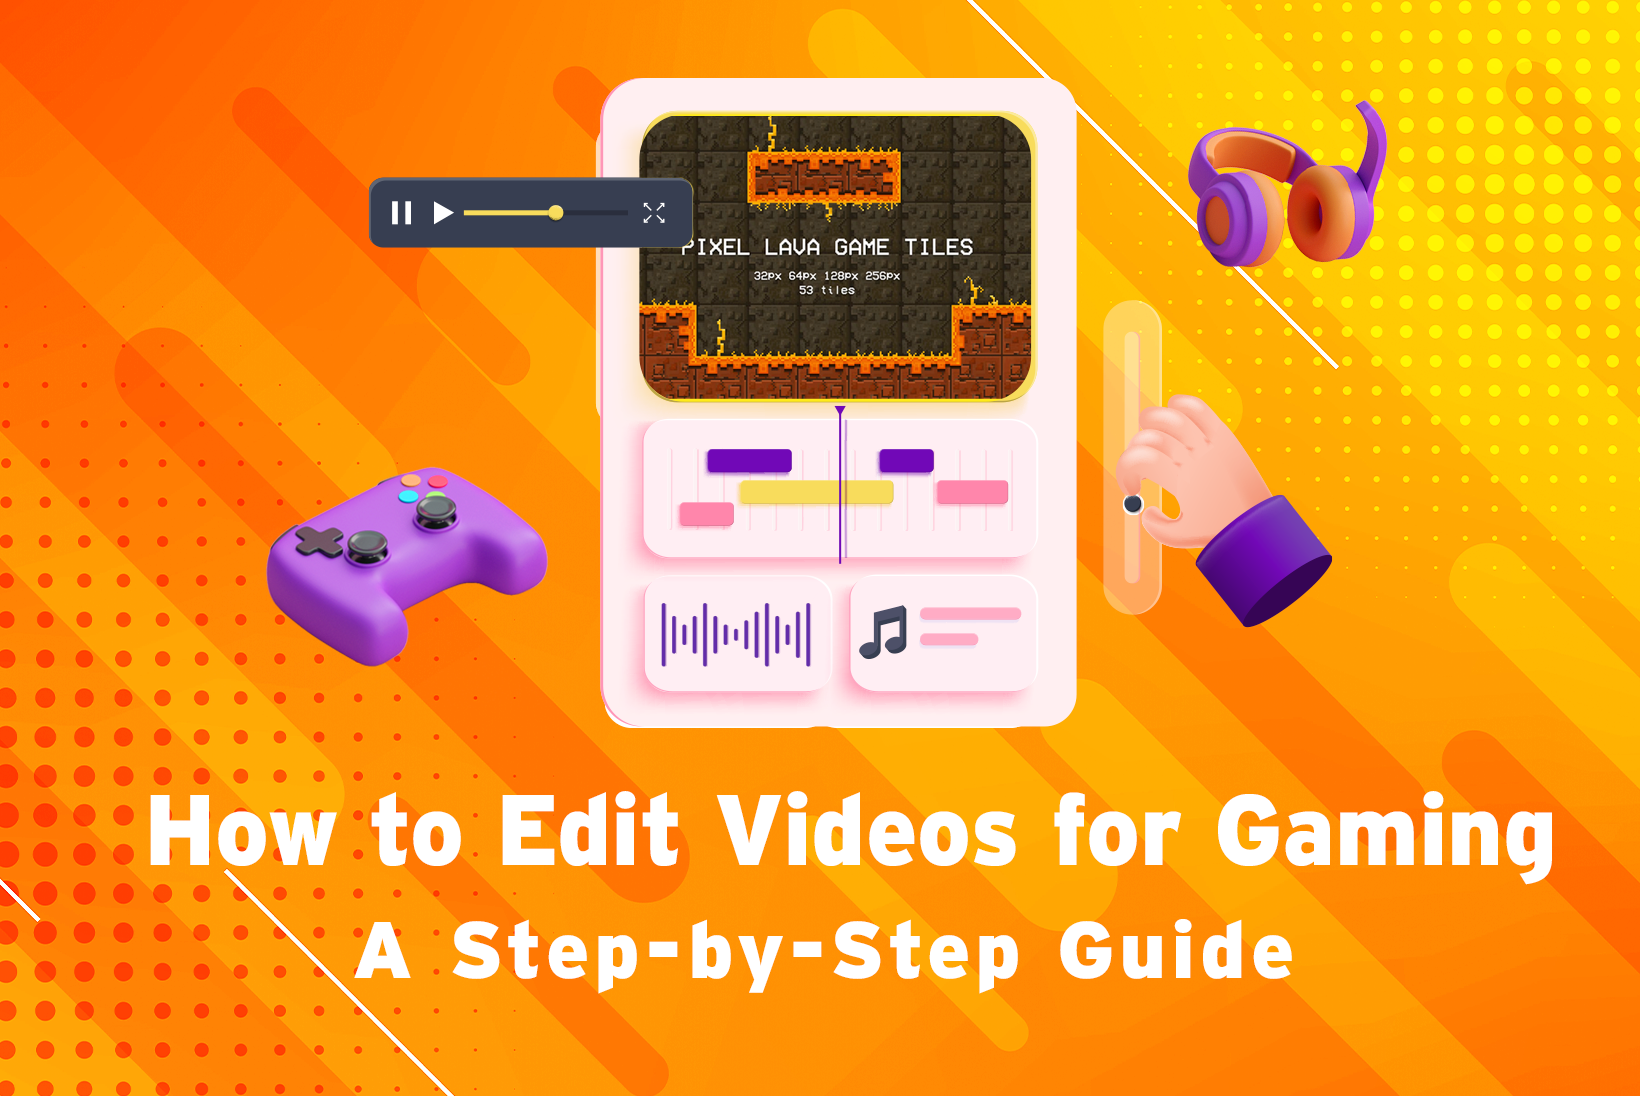 How to edit videos for gaming